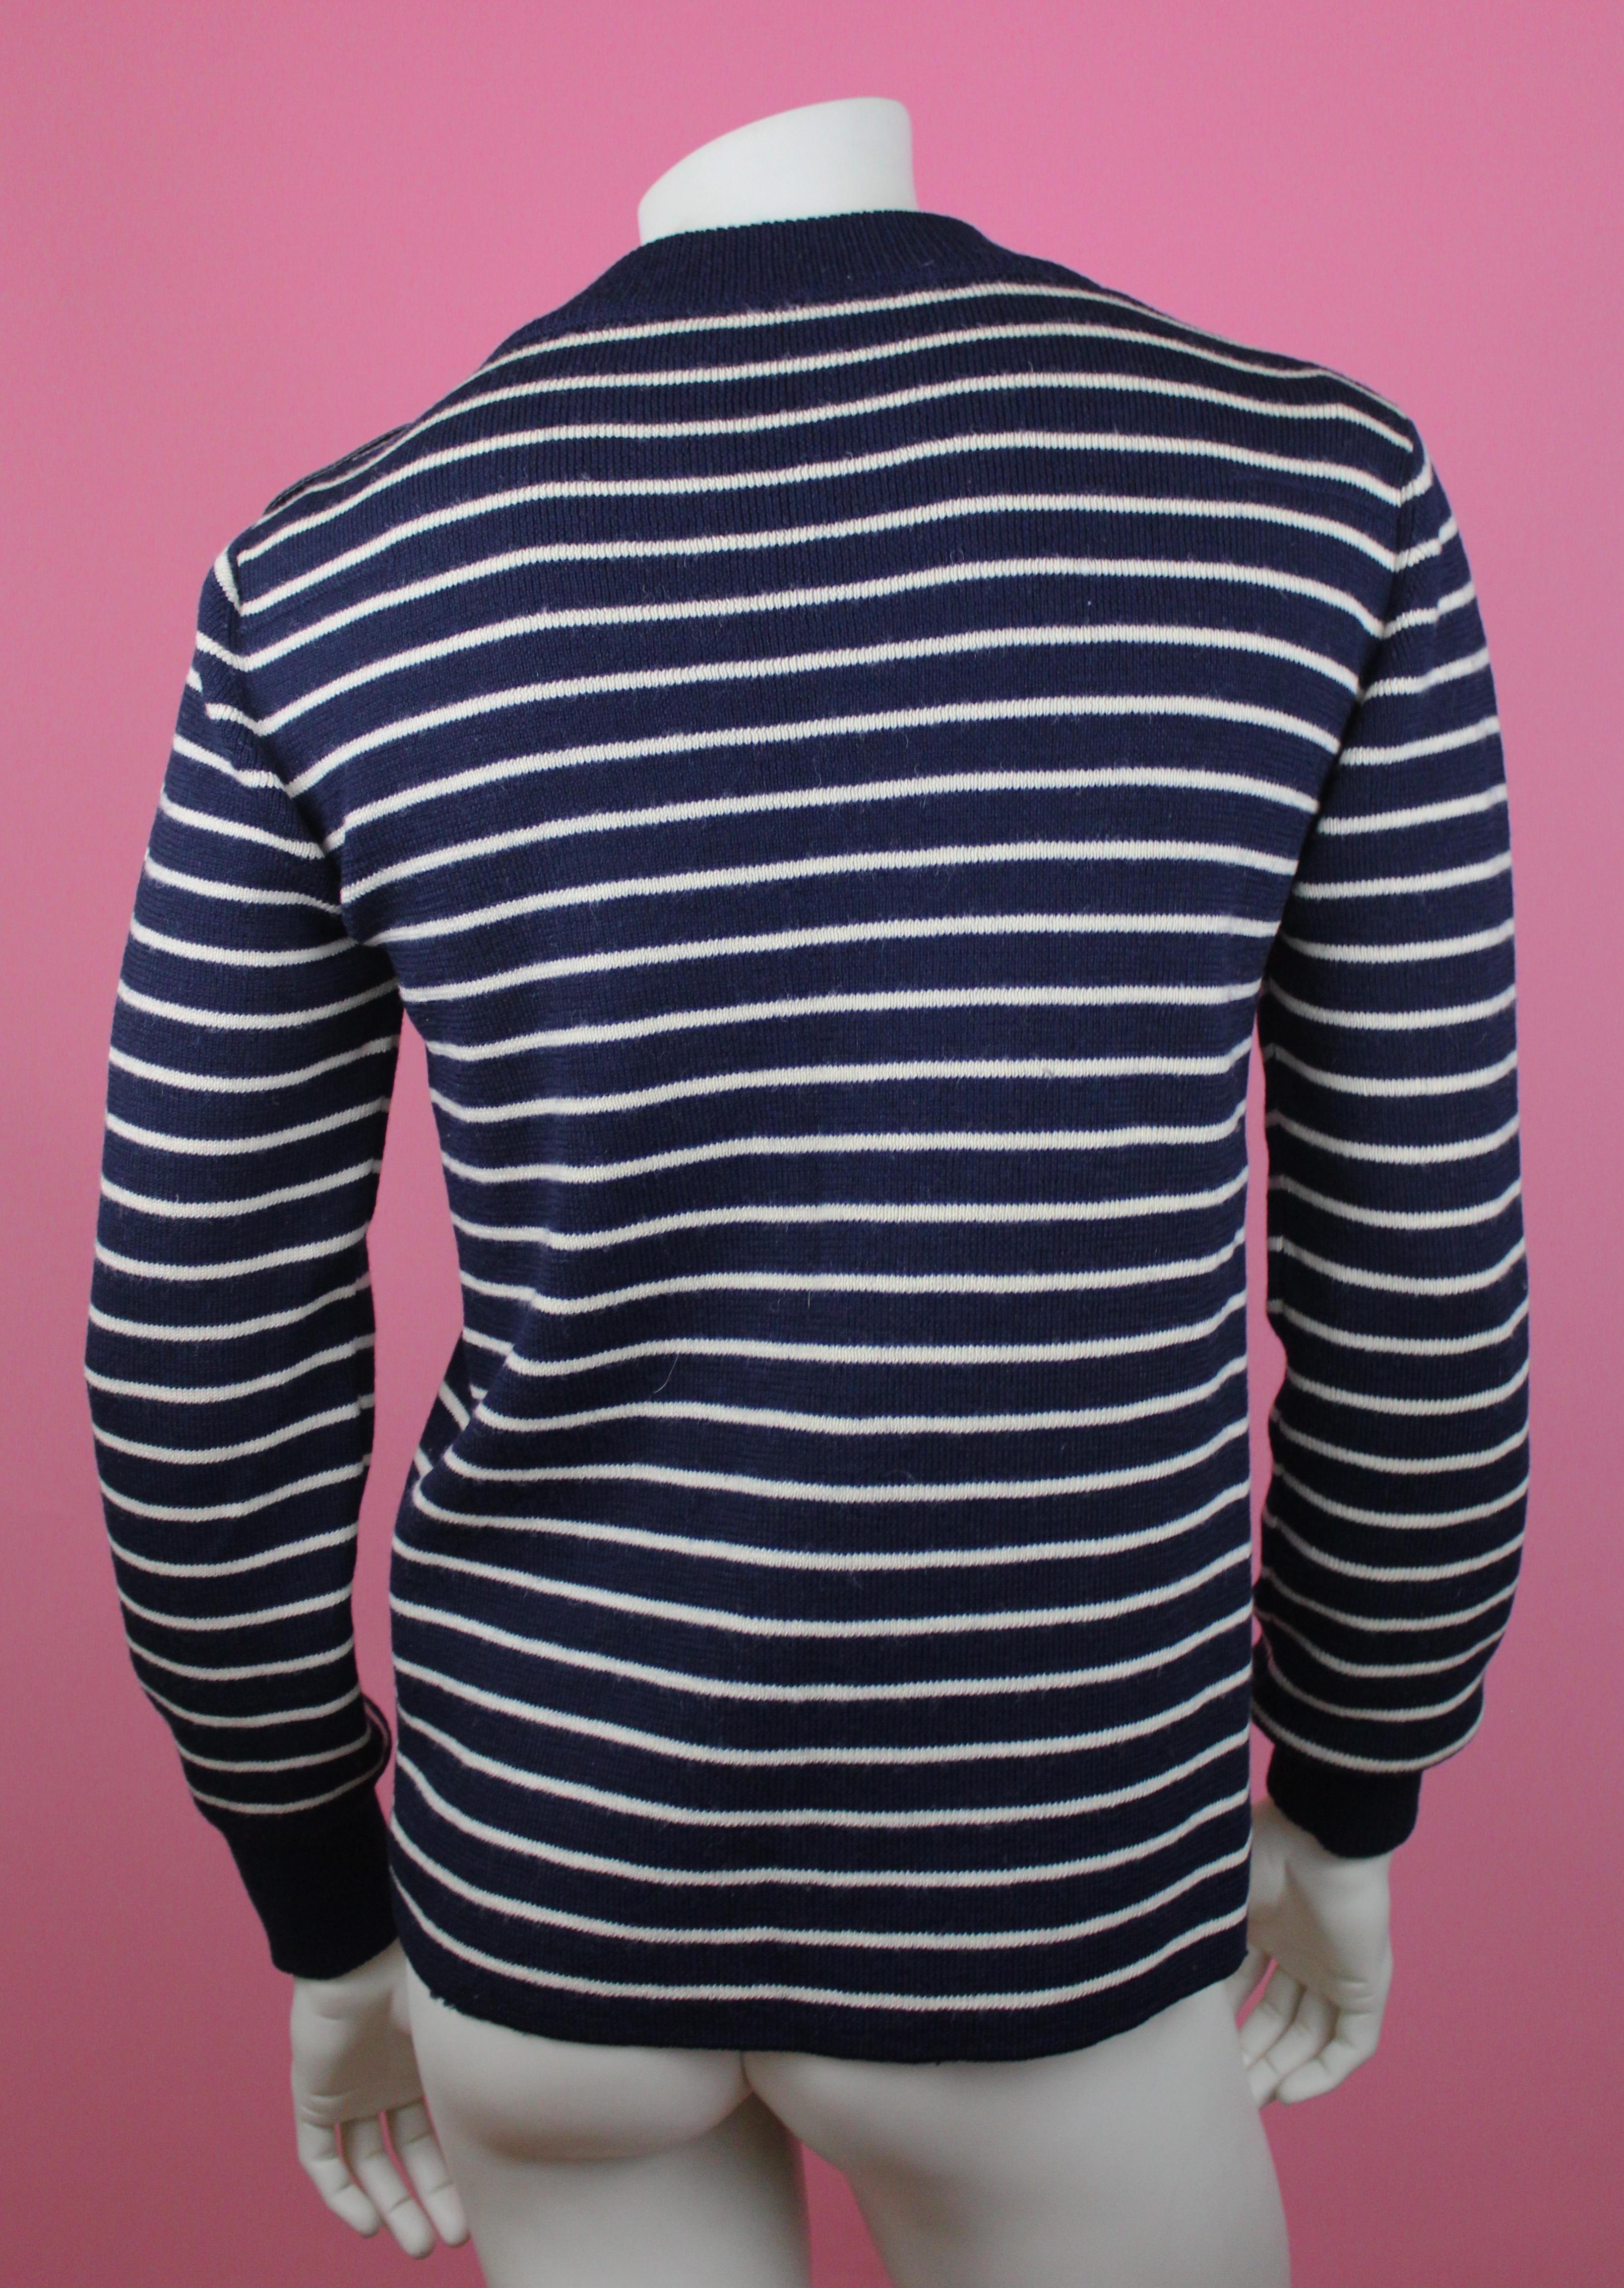 Men's Dior Homme by Hedi Slimane Striped Sweater with Leather Buttons, AW06, Size L  For Sale